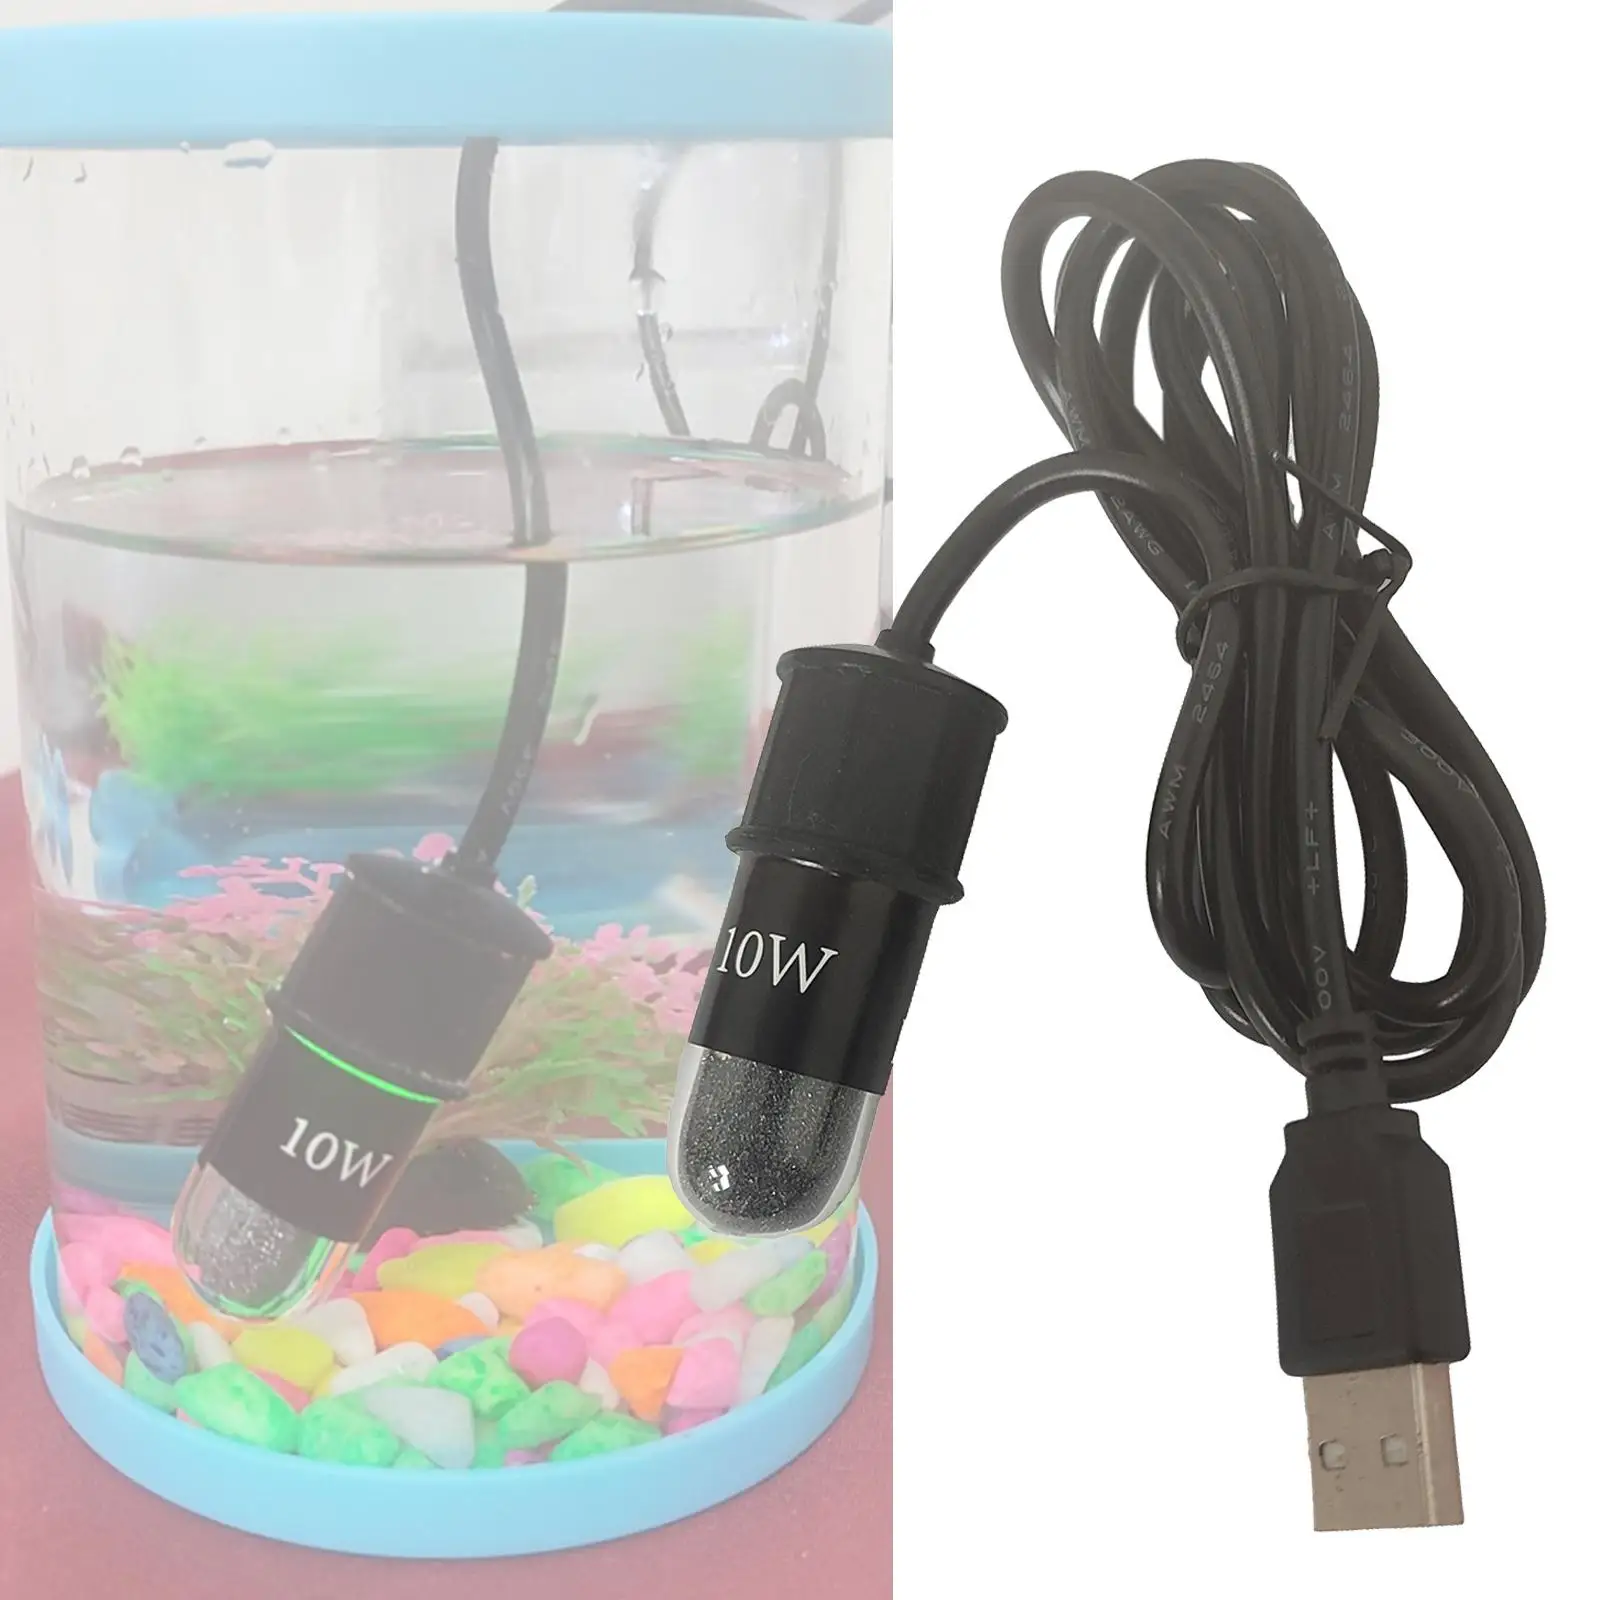 10W Mini Fish Tank Heater with Built in Thermometer Heater